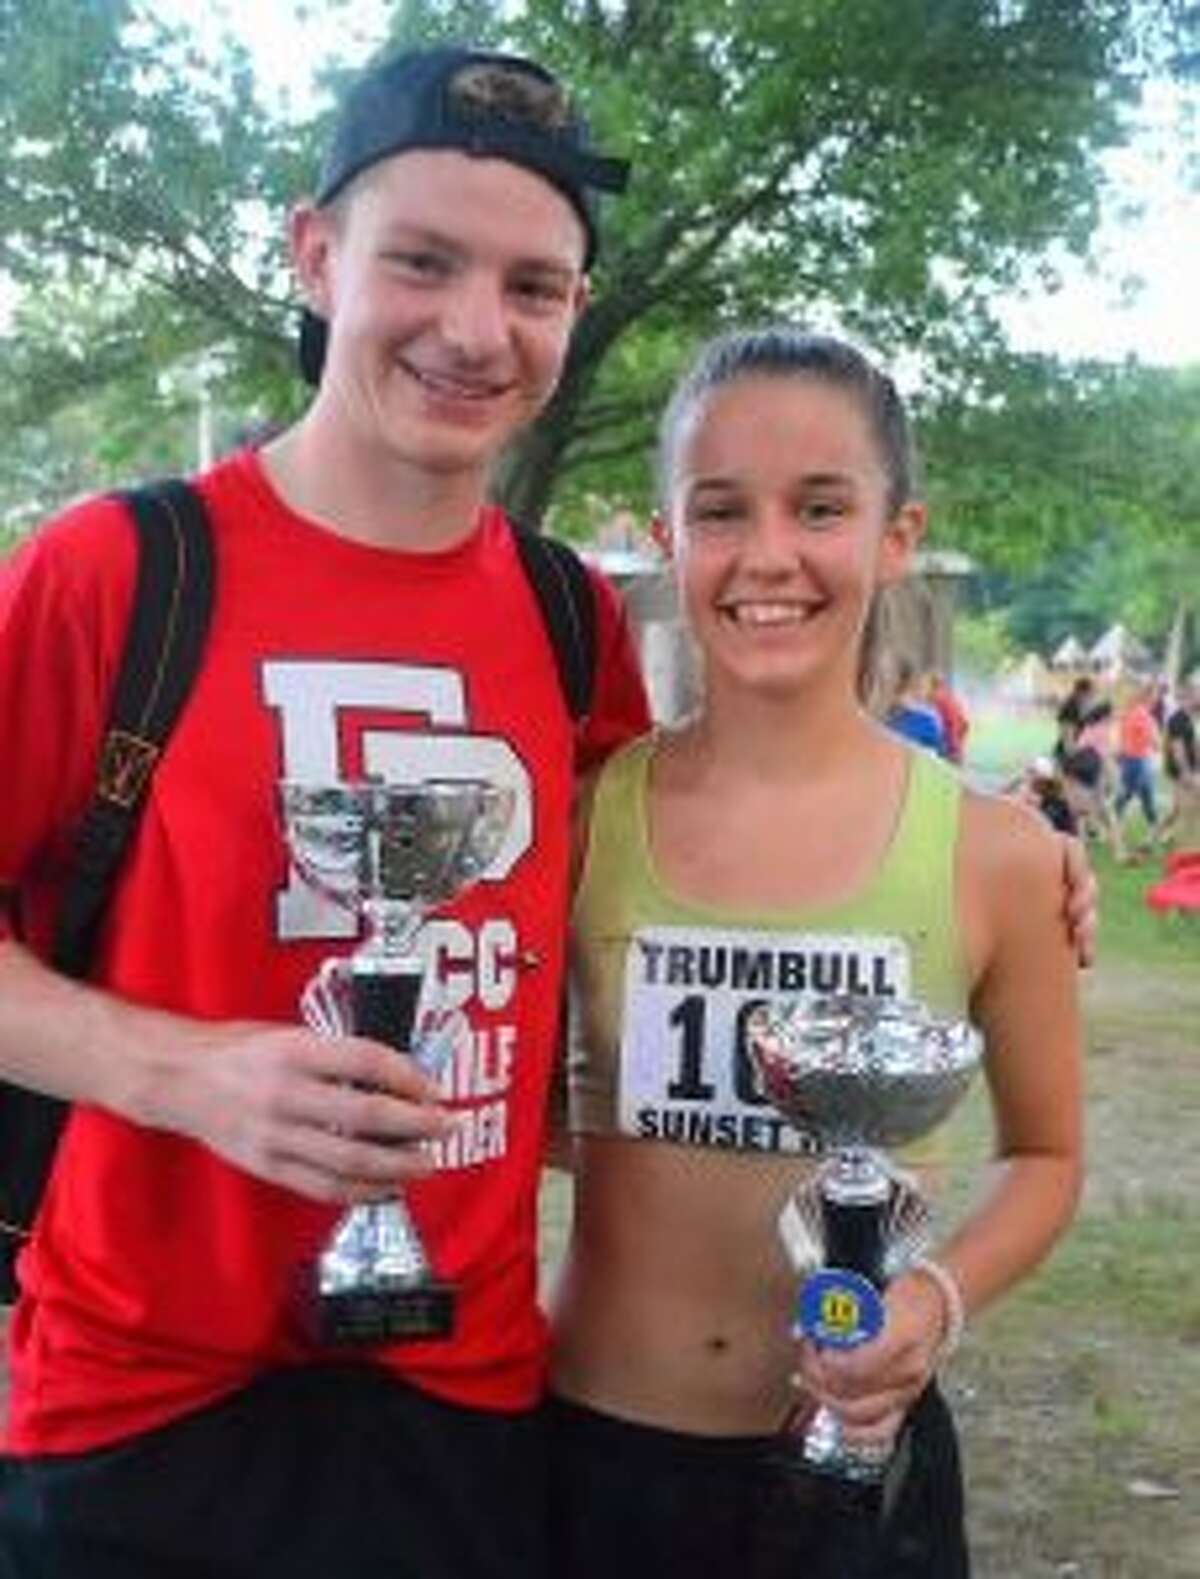 Drew Thompson and Kate Romanchick were the top male and female runners at the Sunset Run.